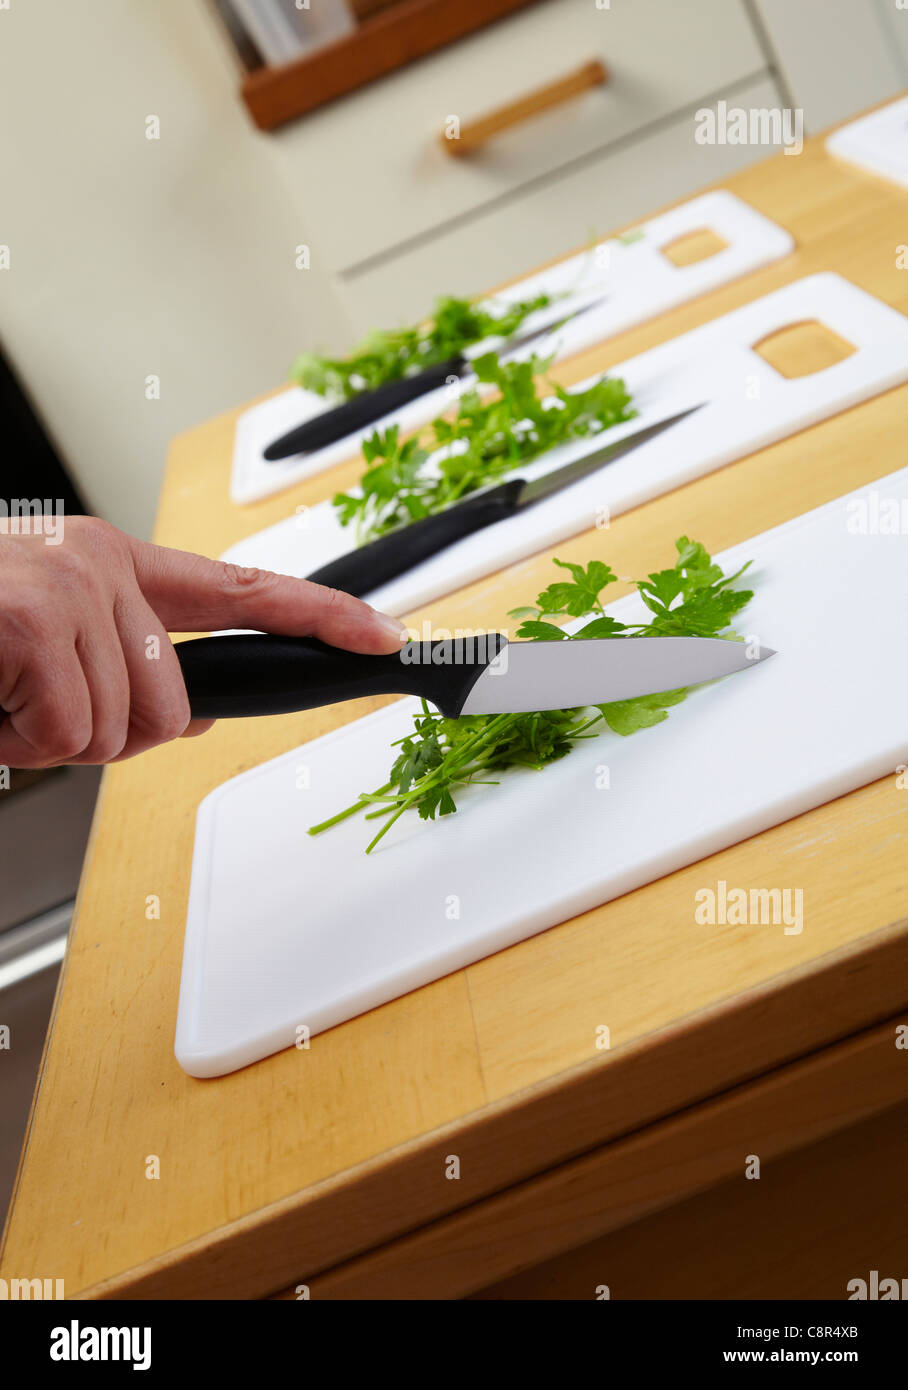 Green herbs on chopping board with kitchen knife. Ready for chopping in cookery class. Hand holding knife demonstrates chopping Stock Photo